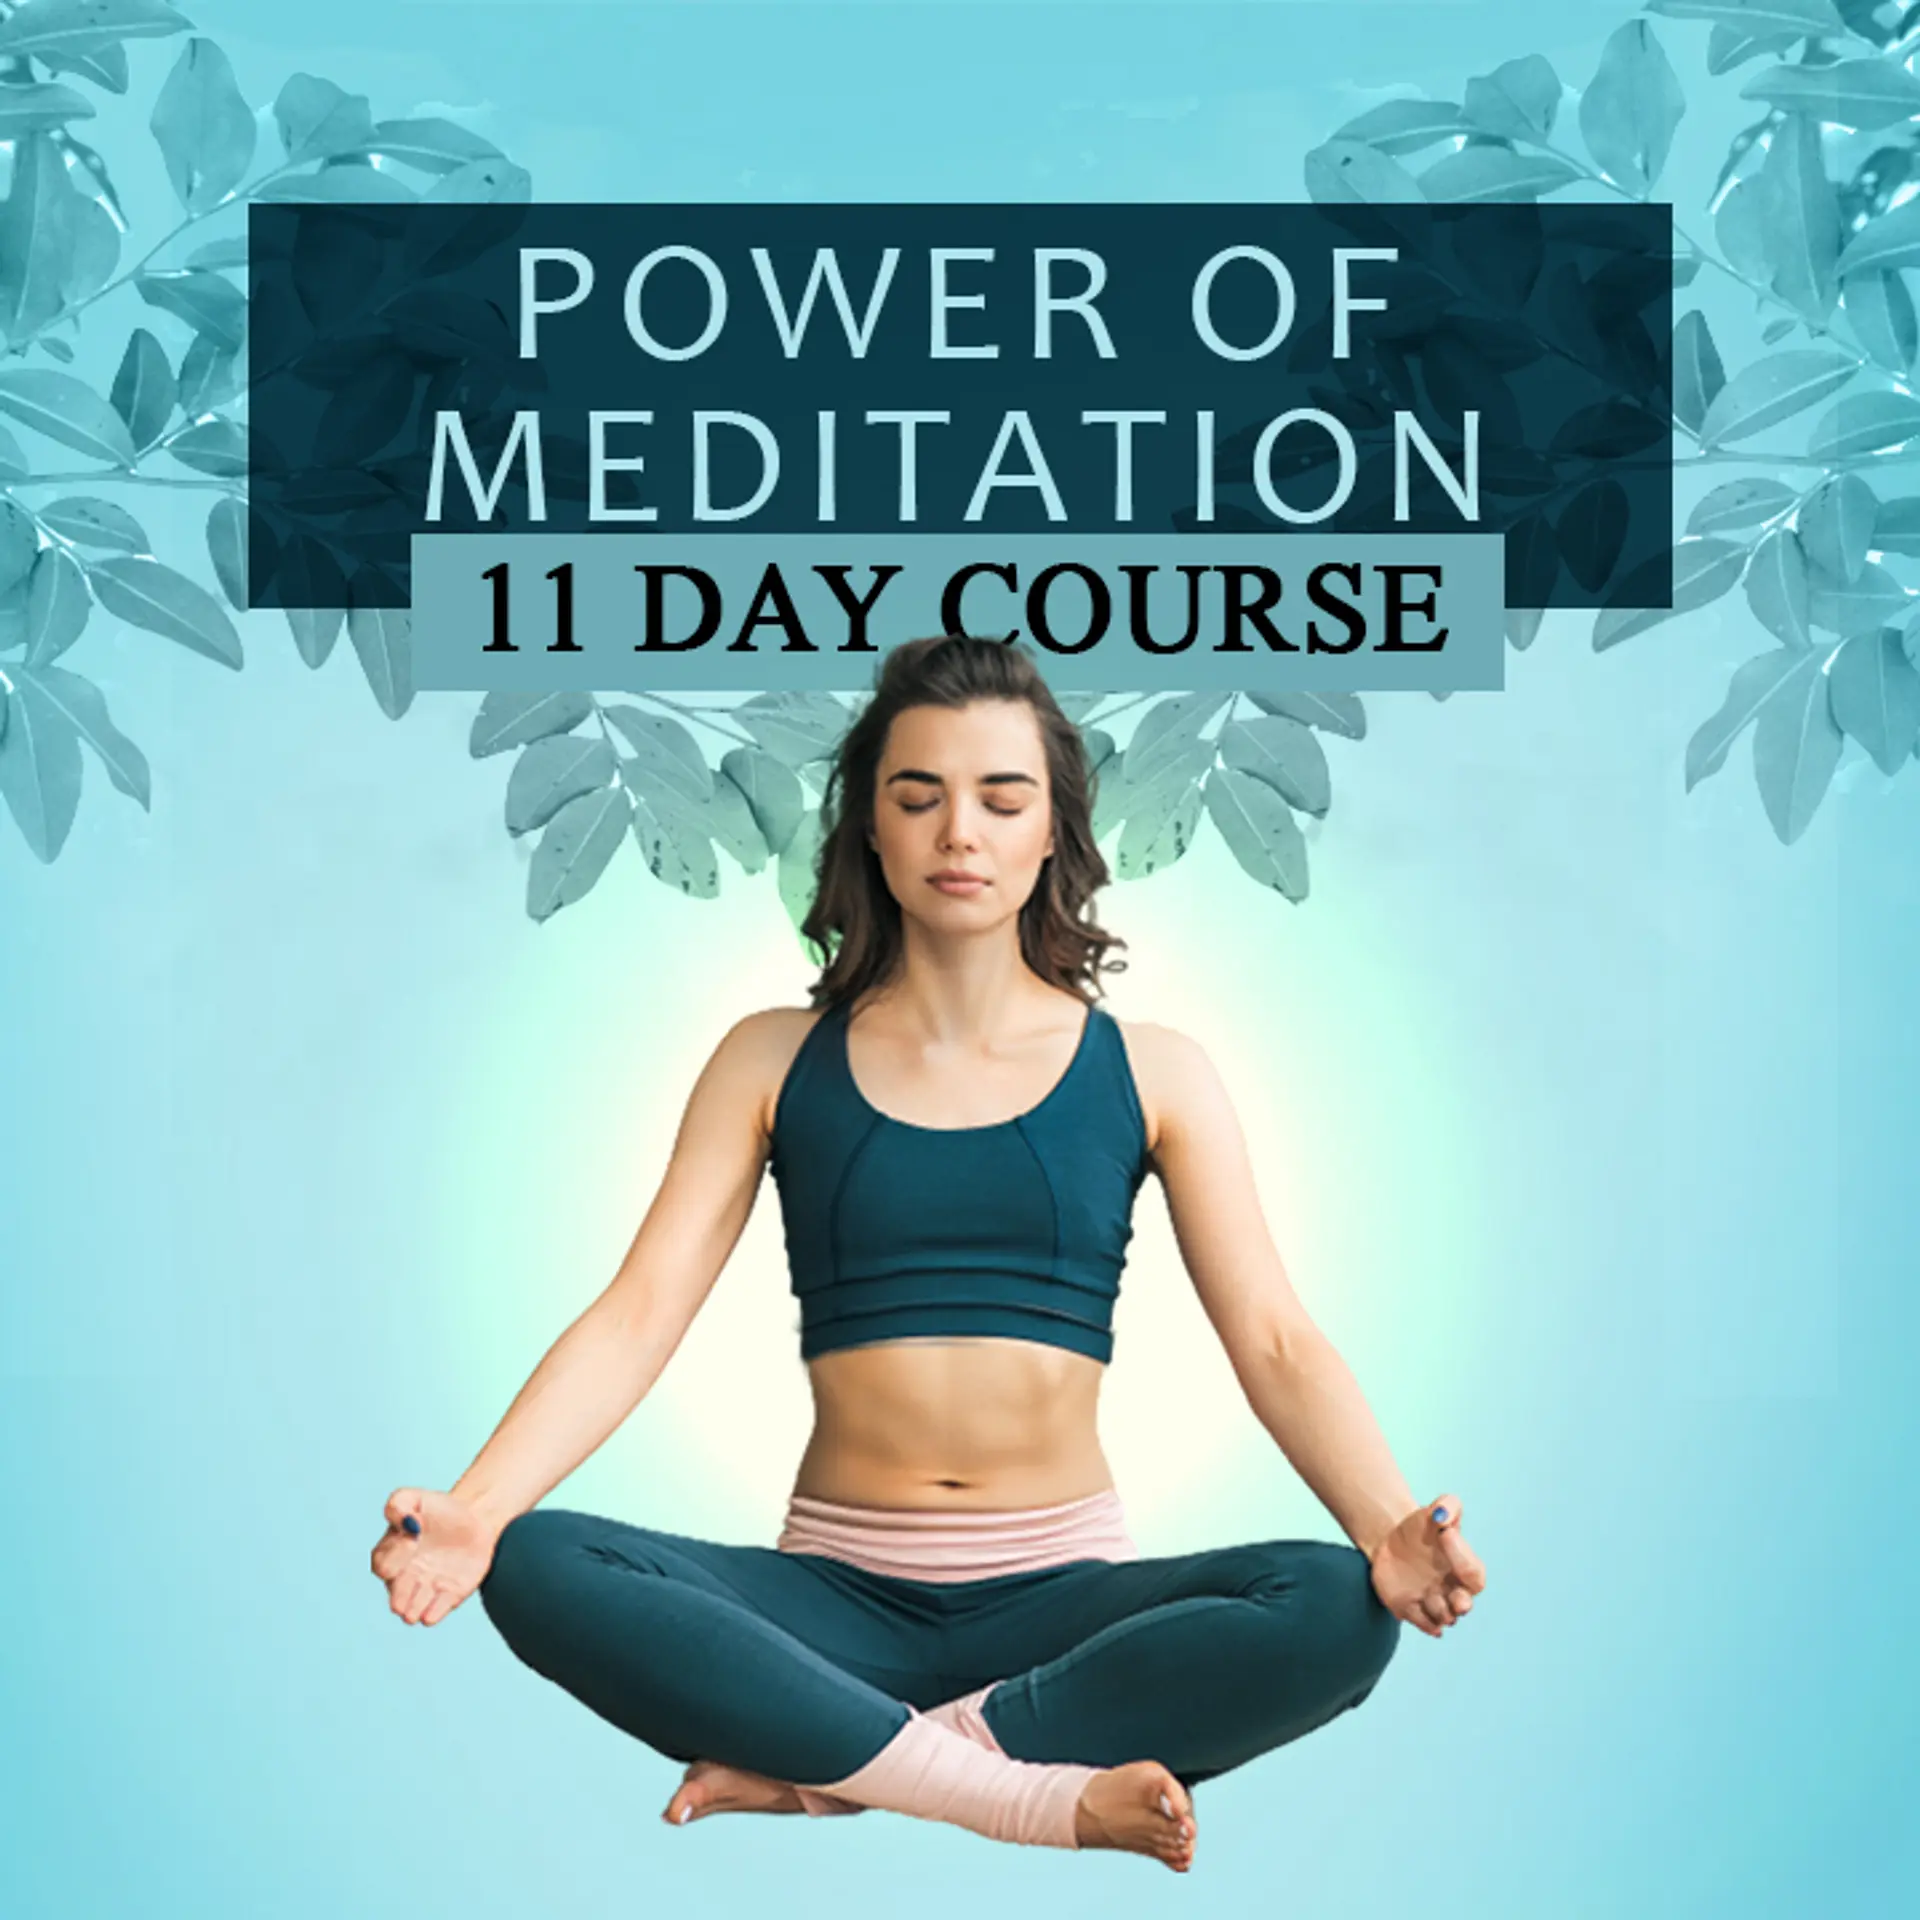 Power of Meditation - 11 Day Course